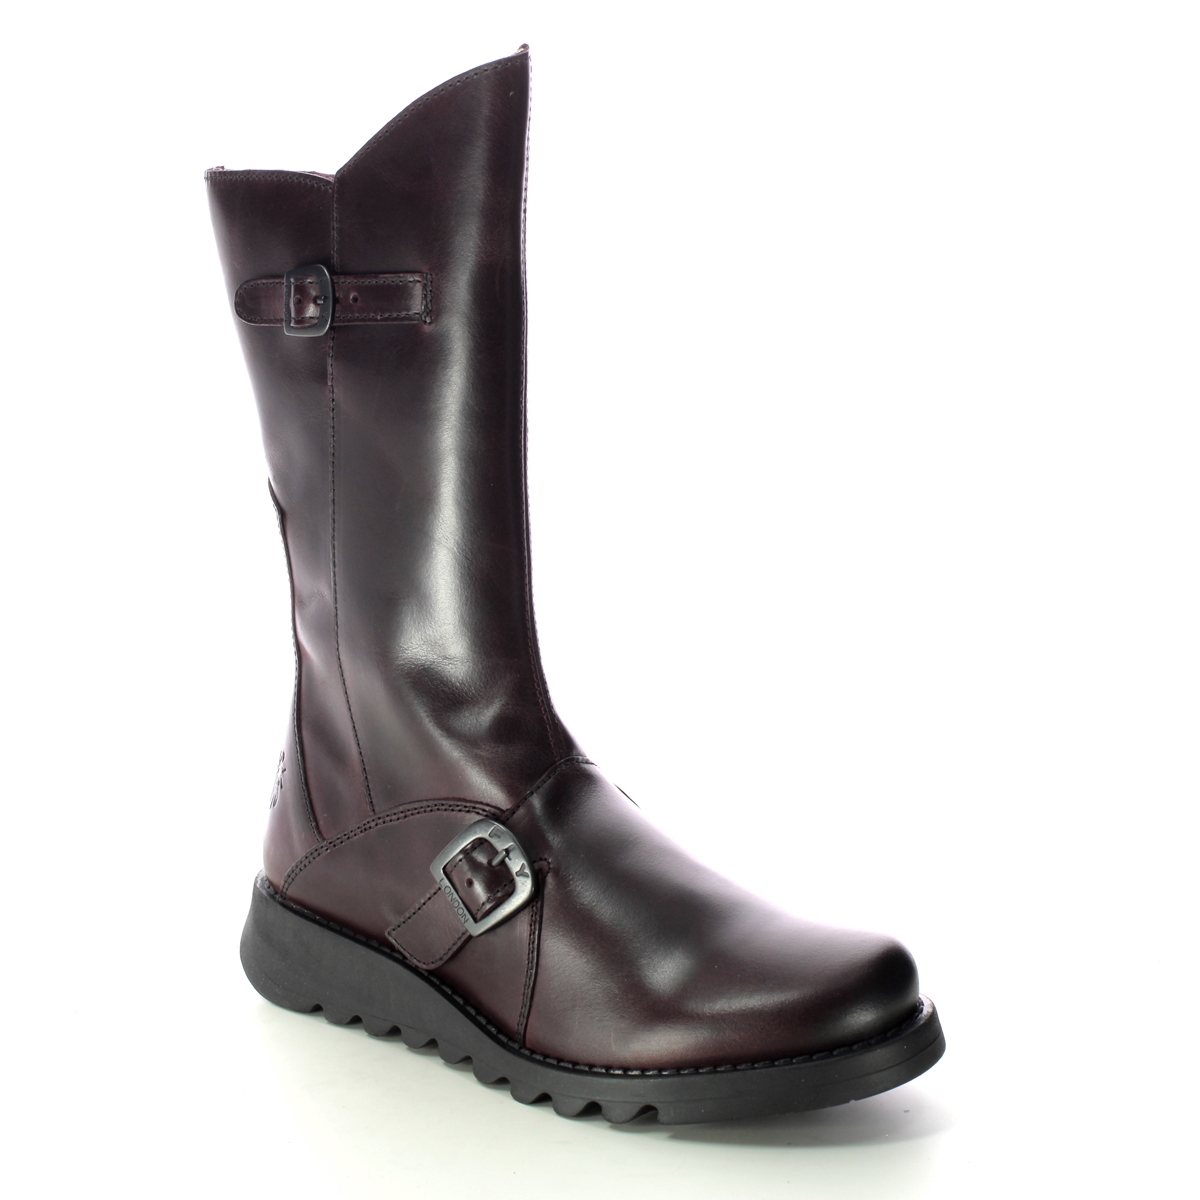 Fly London Mes 2 Wine Leather Womens Mid Calf Boots P142913 In Size 42 In Plain Wine Leather